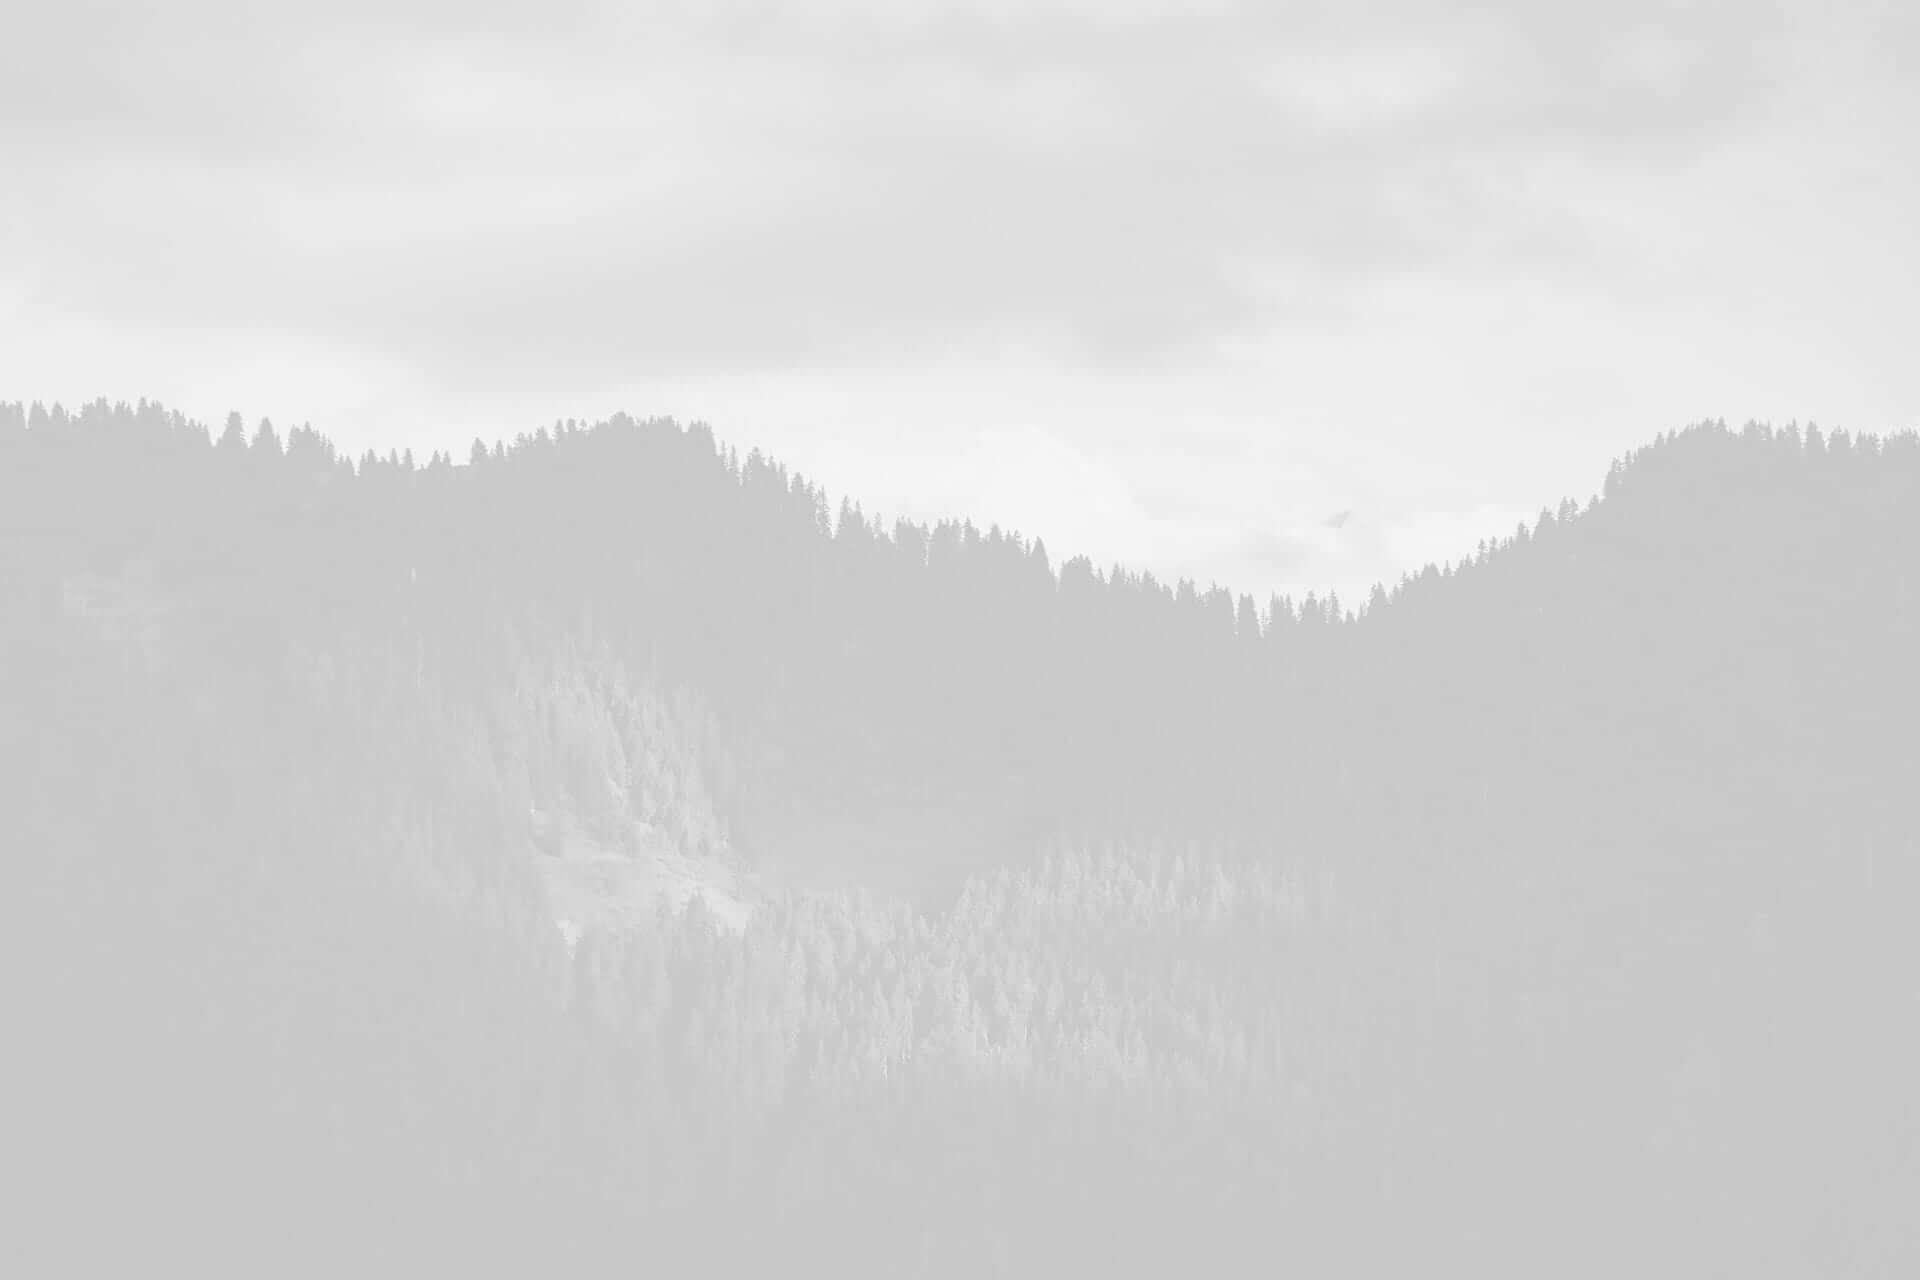 Black and white image of a misty forested mountain landscape with dense tree coverage and low cloud cover.